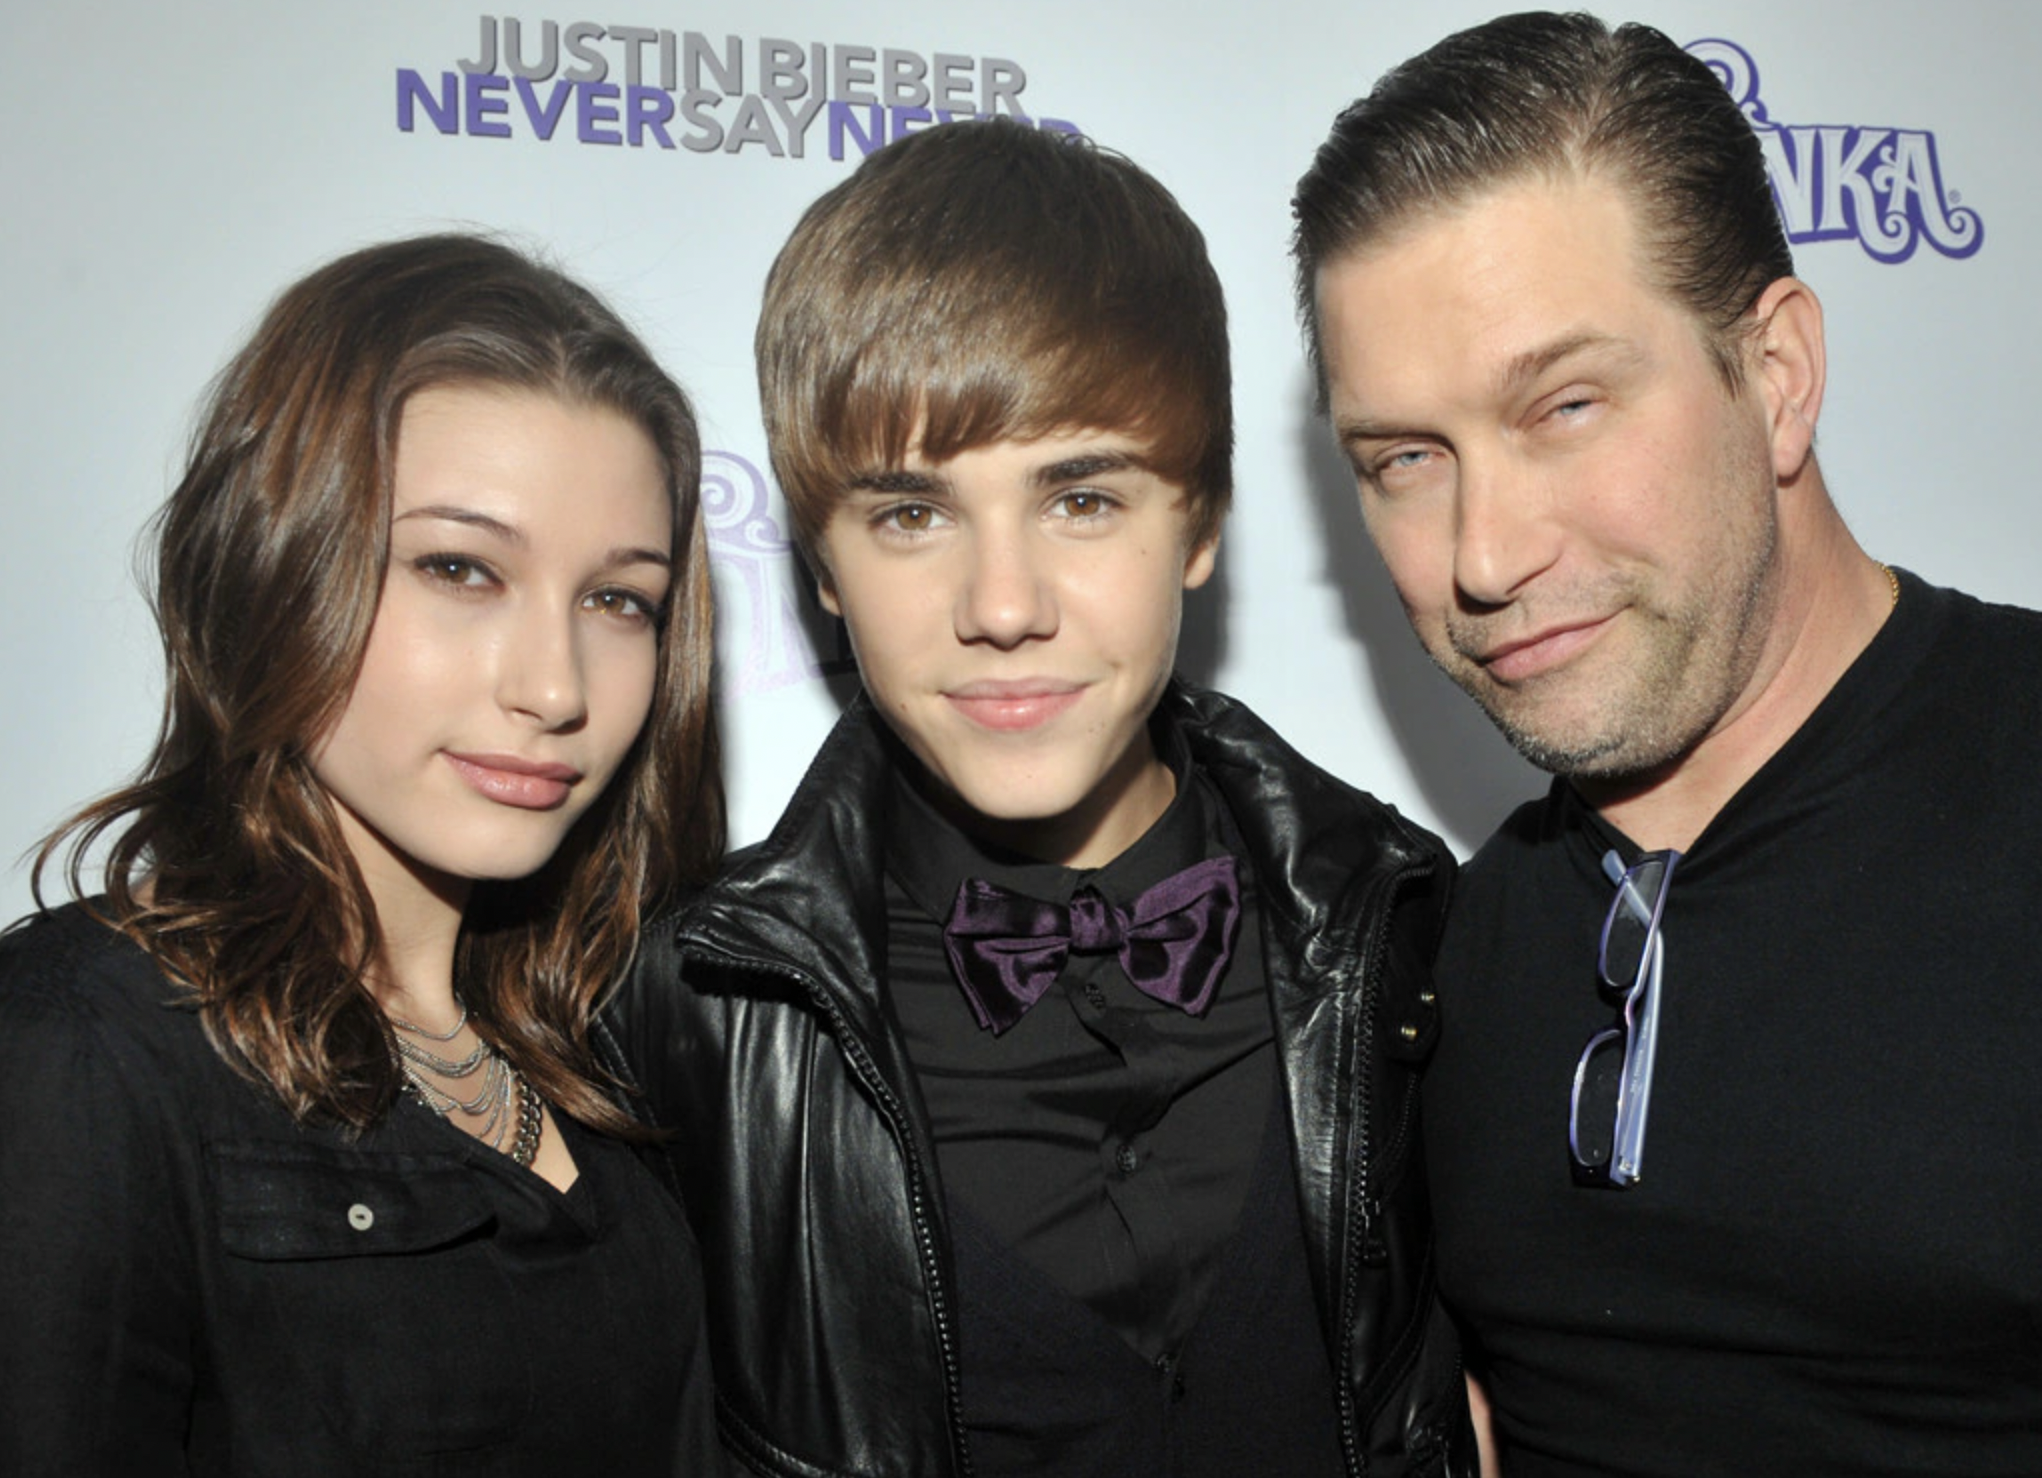 Stephen Baldwin (pictured right) introduced Justin Bieber (pictured center) to his daughter Hailey Baldwin (pictured left) for the first time when they were just teenagers. (Image courtesy: Getty Images)